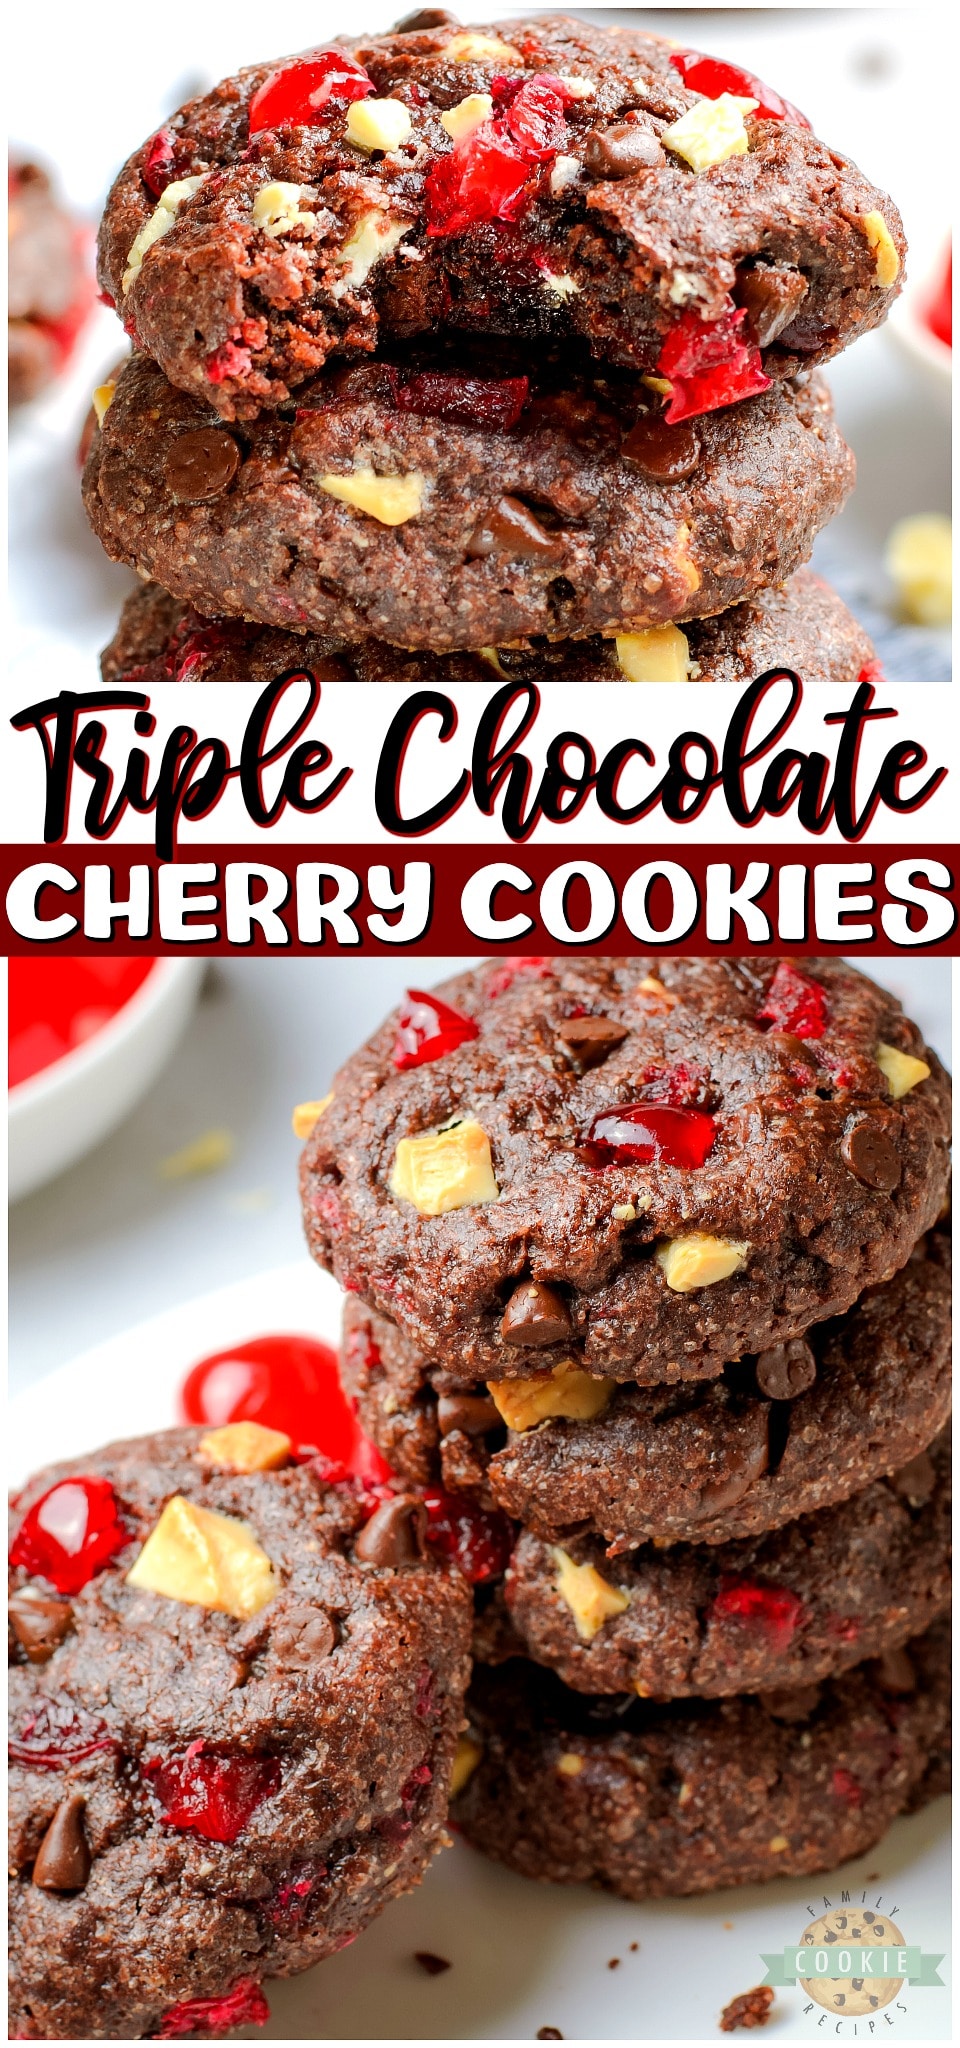 Triple Chocolate Cherry Cookies are Black Forest Cake in cookie form! Soft & chewy chocolate cookies full of white and dark chocolate chips & cherry bits with lovely flavor!